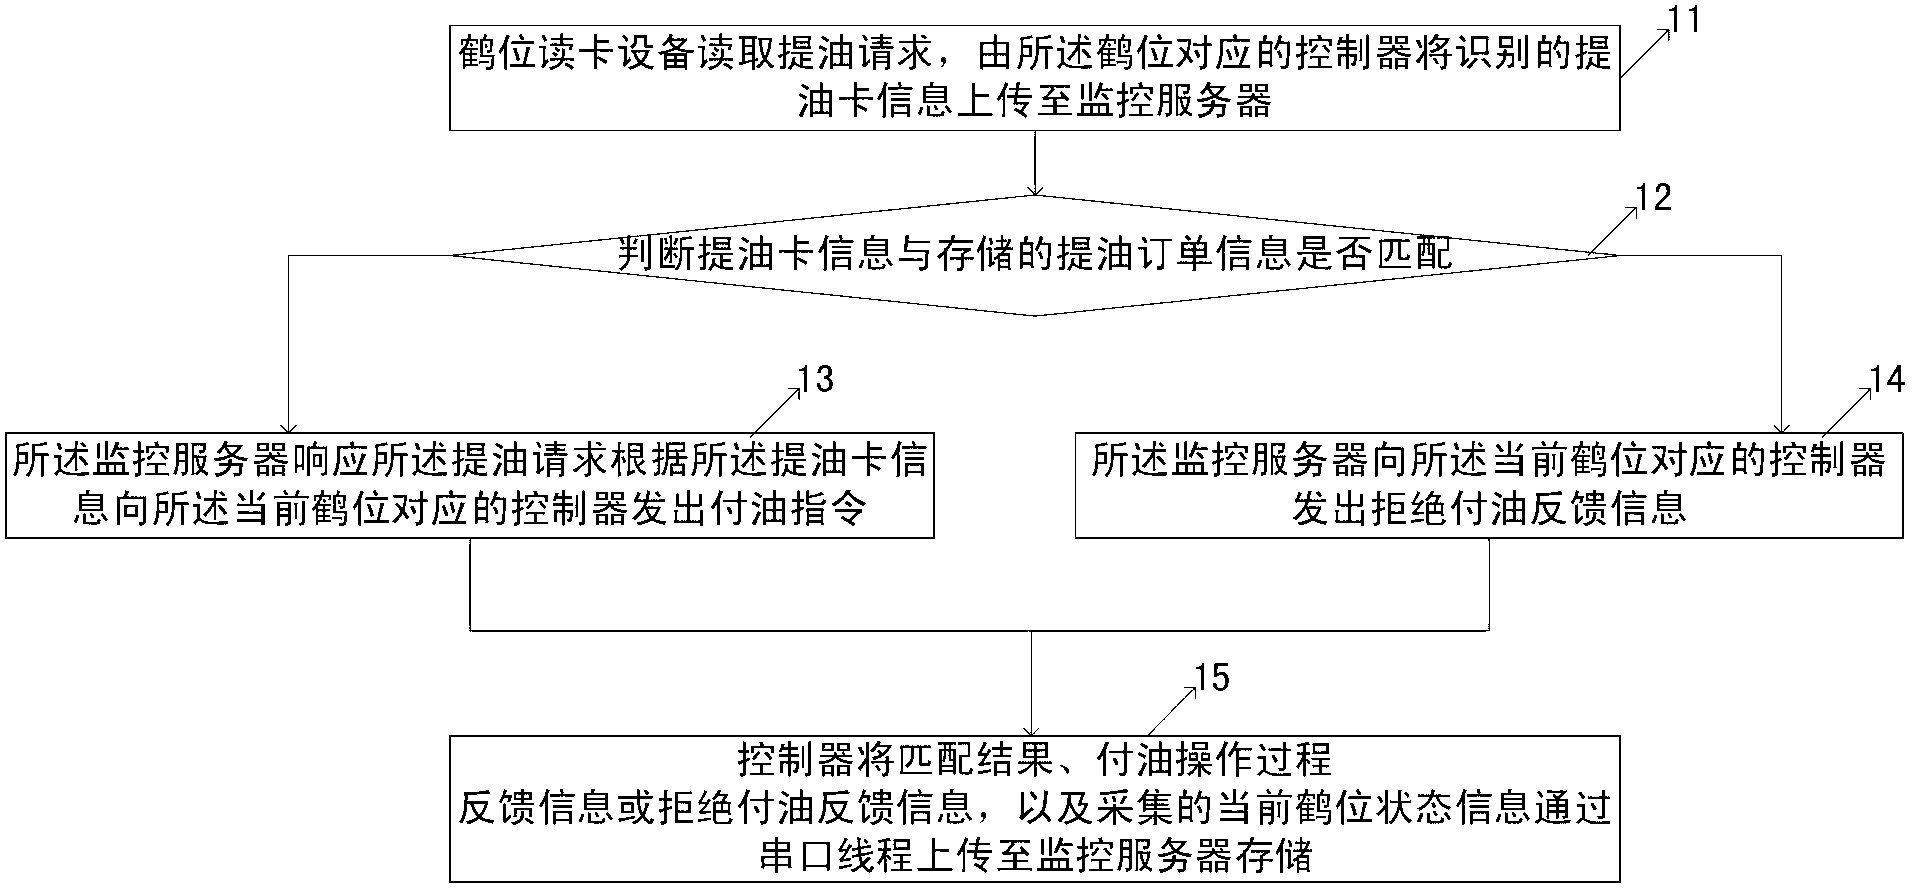 Method and system for processing retail oil receipt data